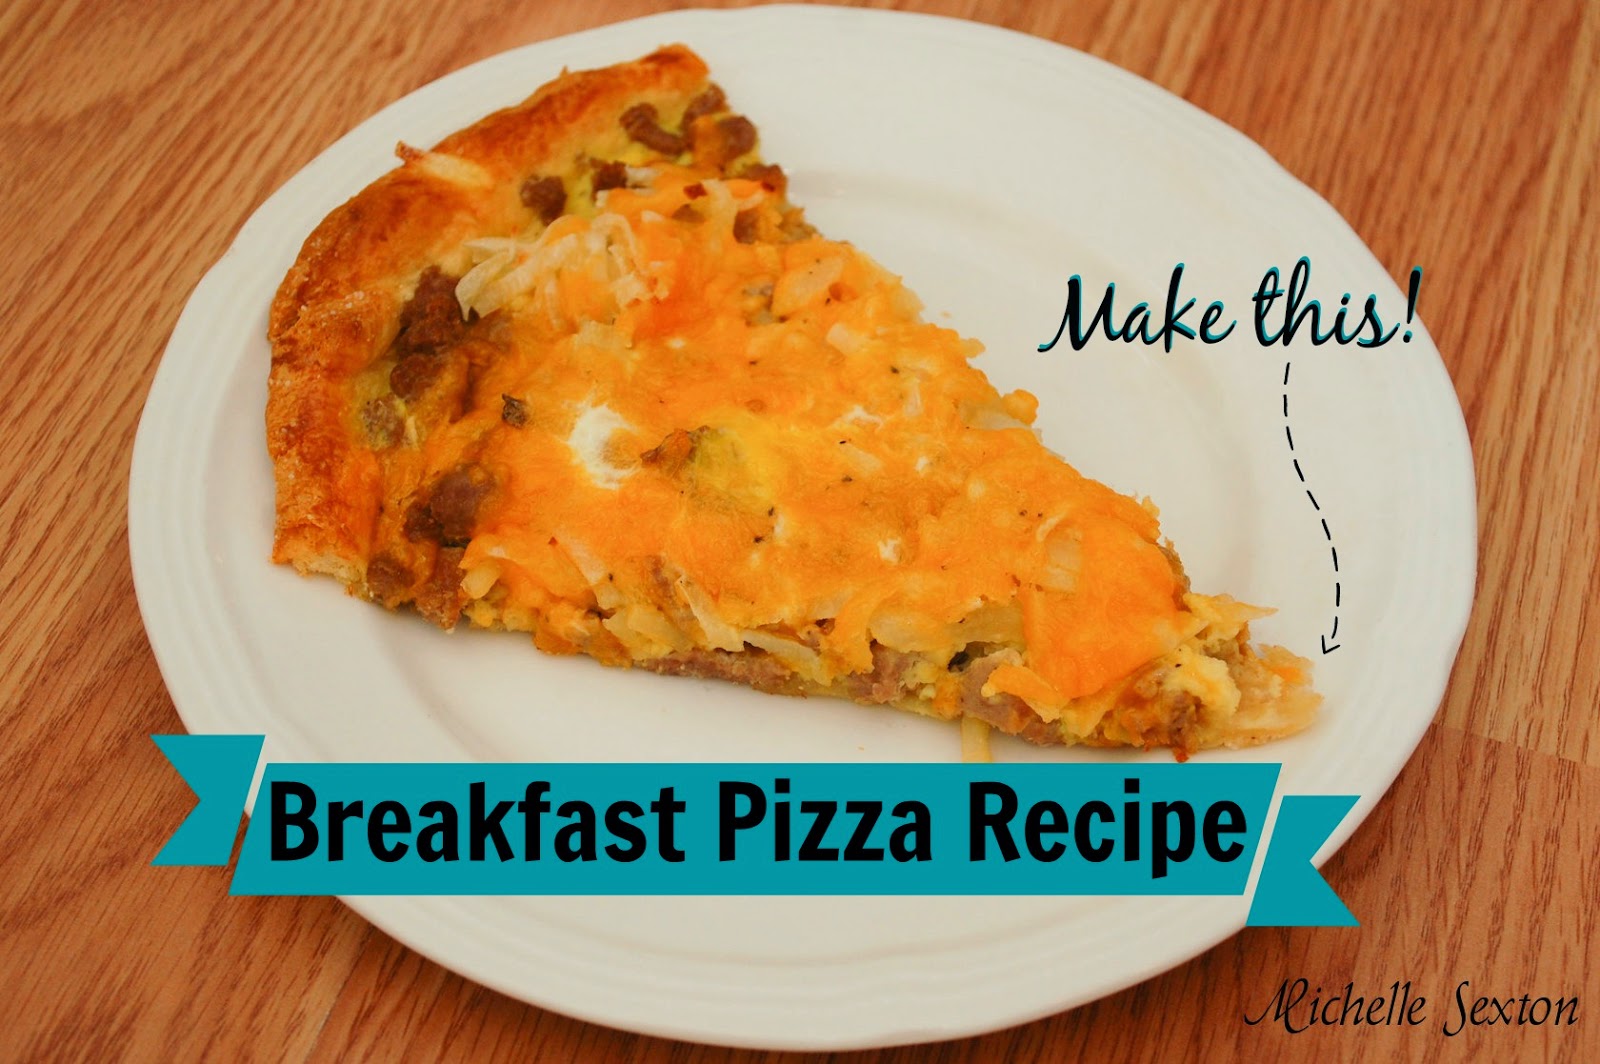 This Breakfast Pizza Recipe is the perfect thing to make for any meal, regardless of the time of day. Click through to learn how to make this.